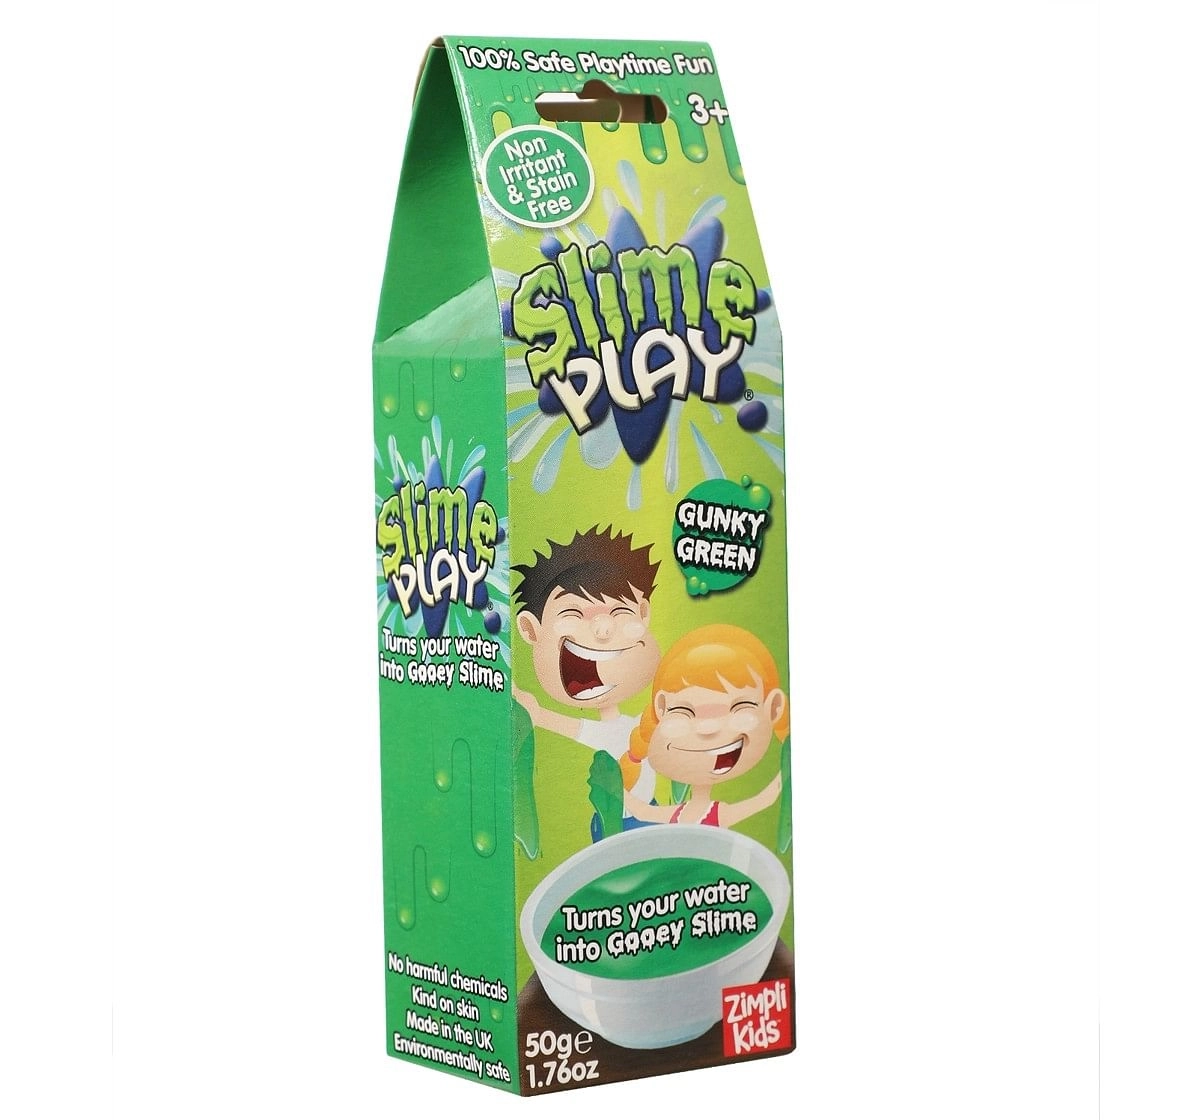 Simba Slime Play Goey Stainfree slime Multicolor 3Y+